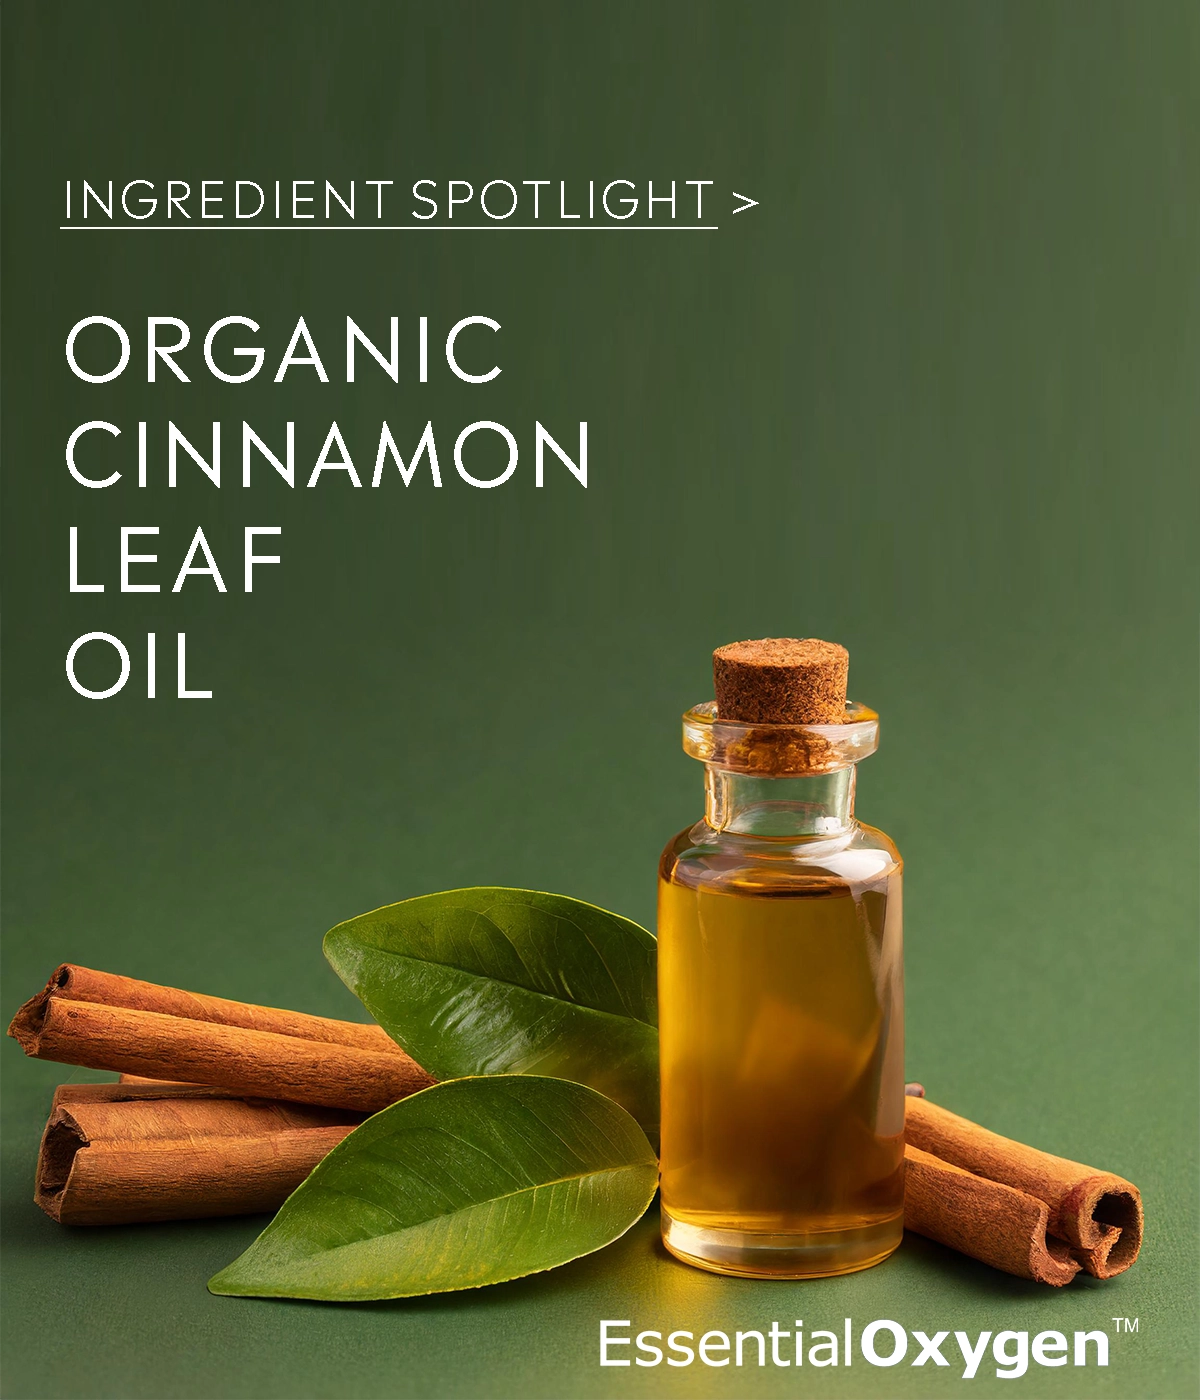 The Science Behind Our Organic Cinnamon Leaf Oil